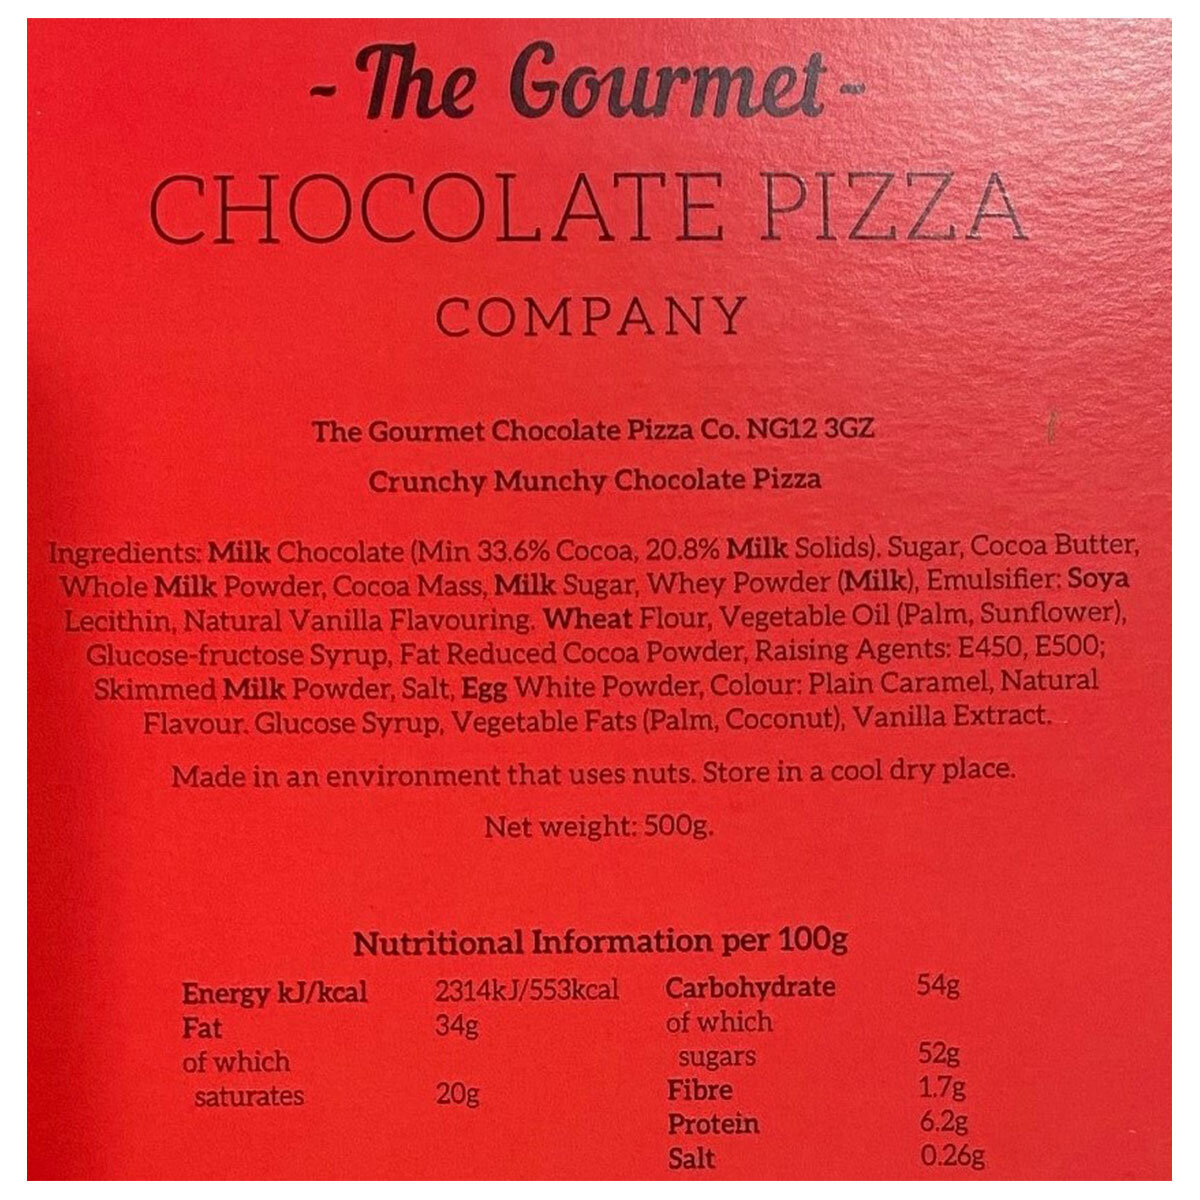 The Gourmet Chocolate Pizza Company - Crunchy Munchy Pizza, 10 Inches